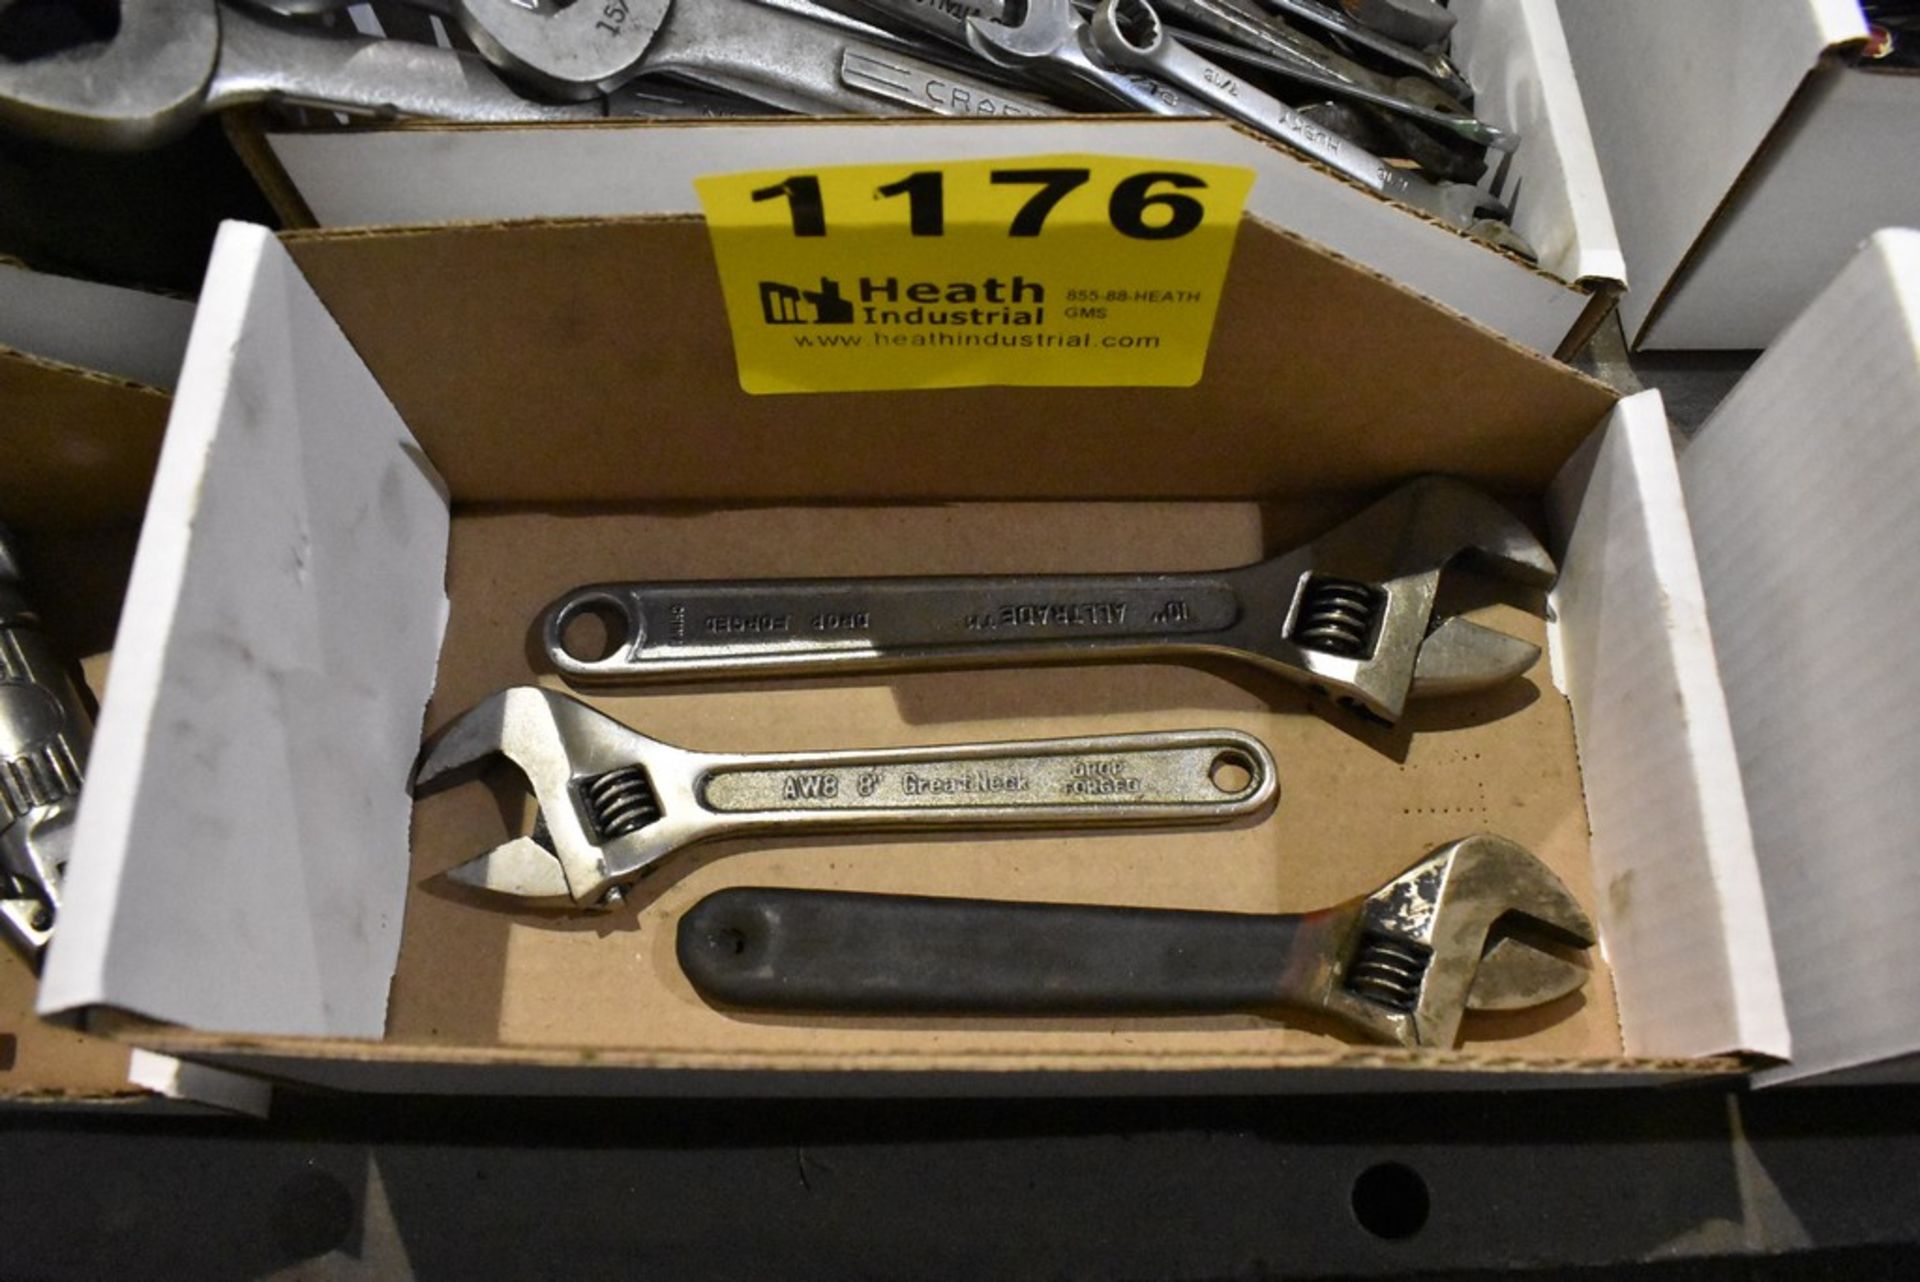 (3) CRESCENT WRENCHES IN BOX